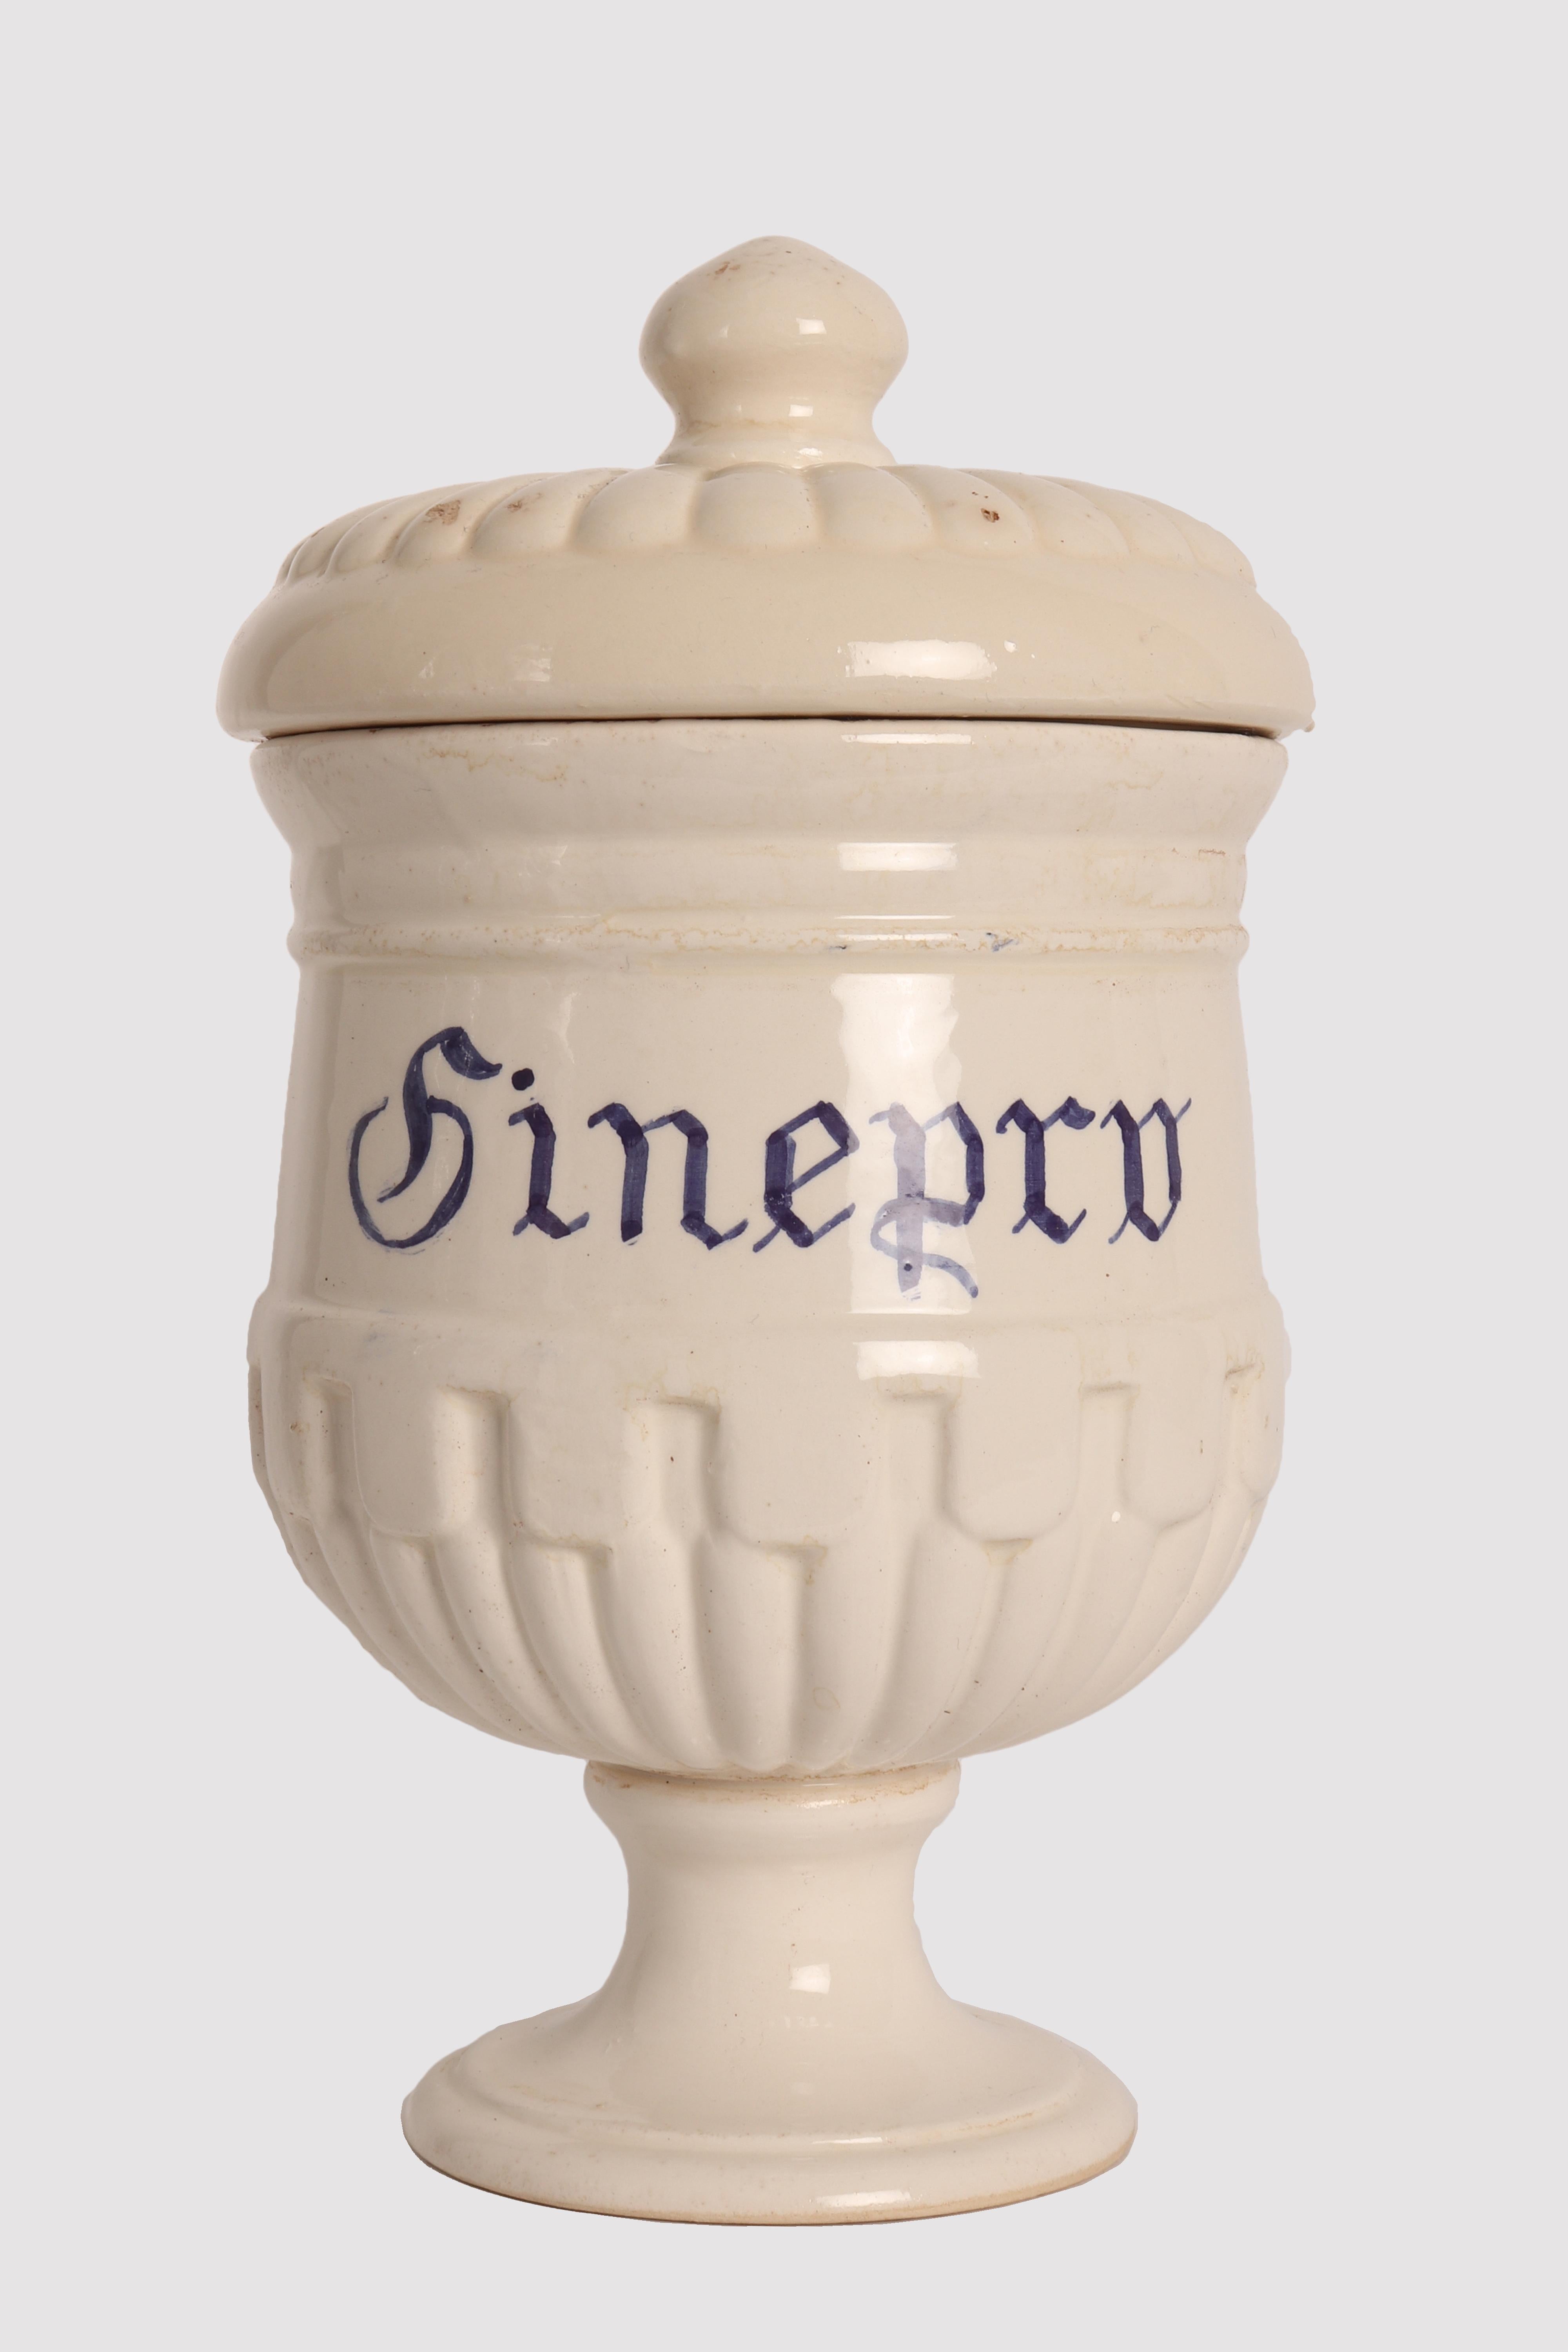 Set of five small jars with lid for pharmacy-herbalist's shop in white ceramic with cobalt blue inscriptions, to contain Juniper, Willow, Gentian, Verbena, Brown seaweed of neoclassical taste with geometric decorations in relief. Unidentified brand.